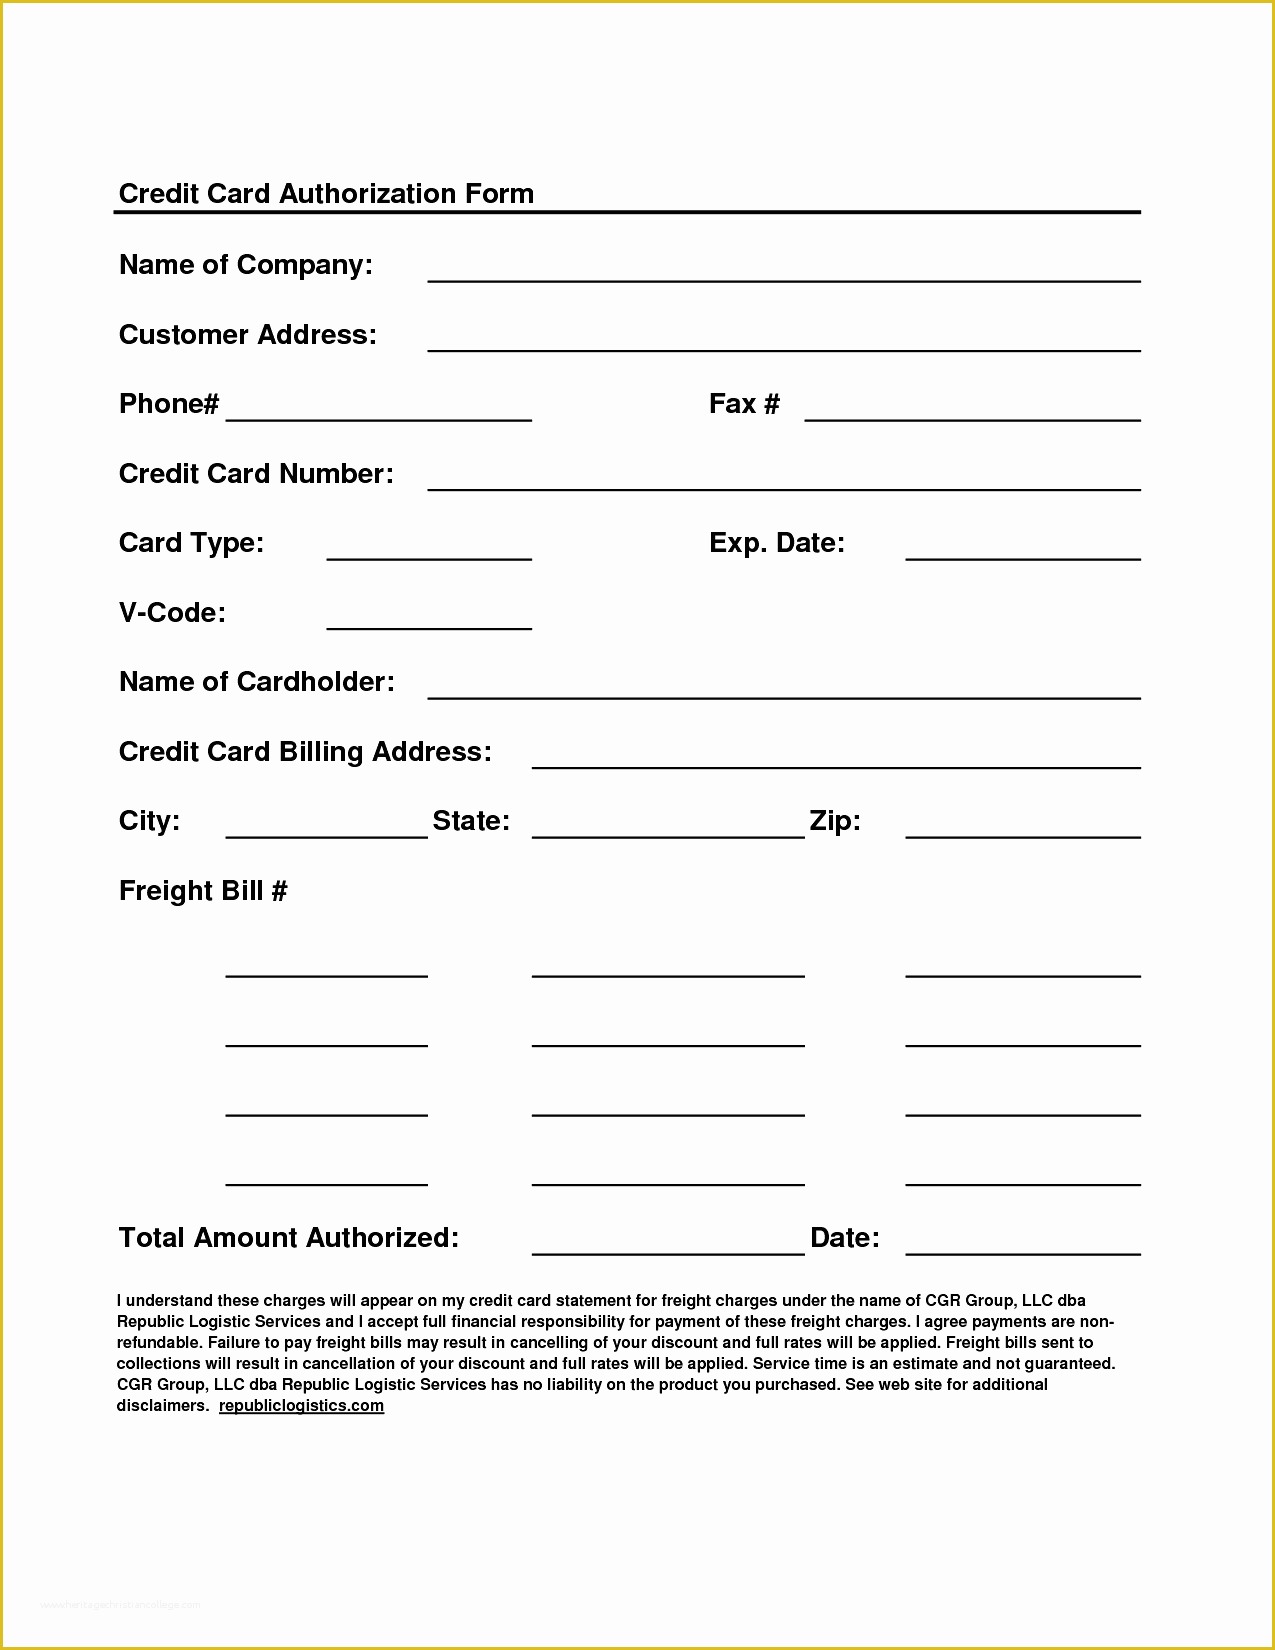 Free Credit Card Authorization Form Template